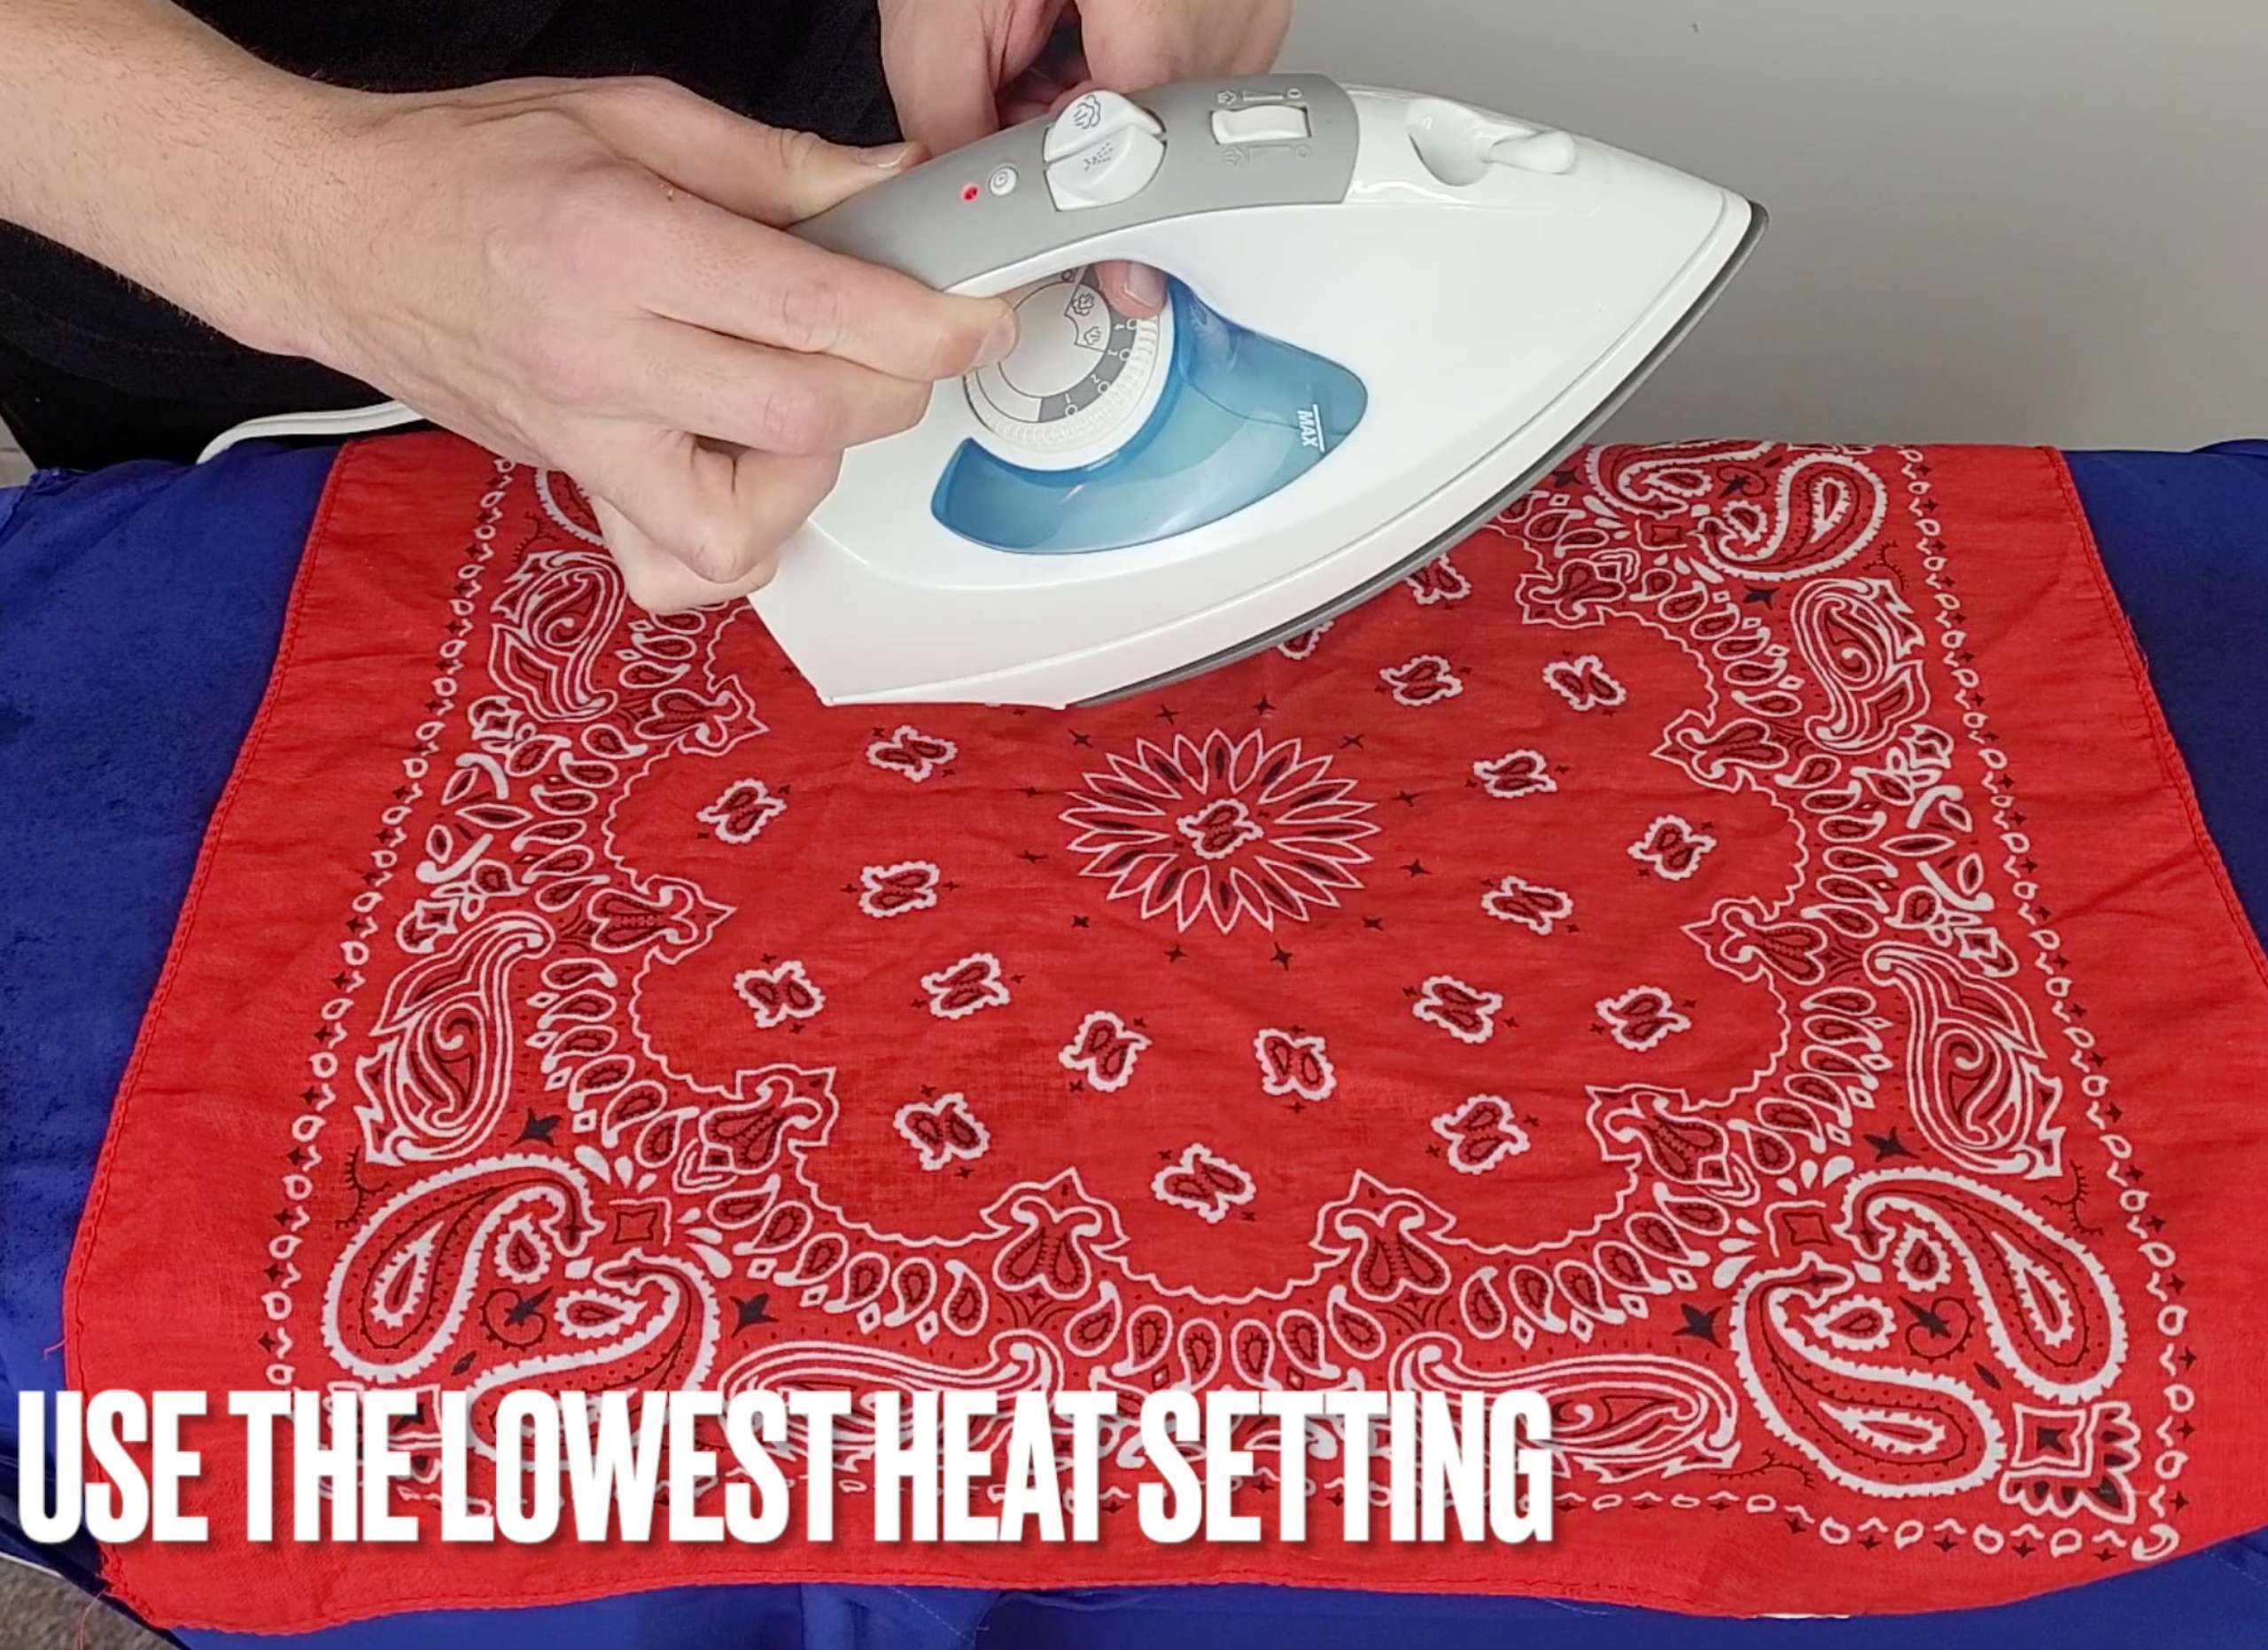 photo of a man adjusting an iron to the lowest heat setting possible